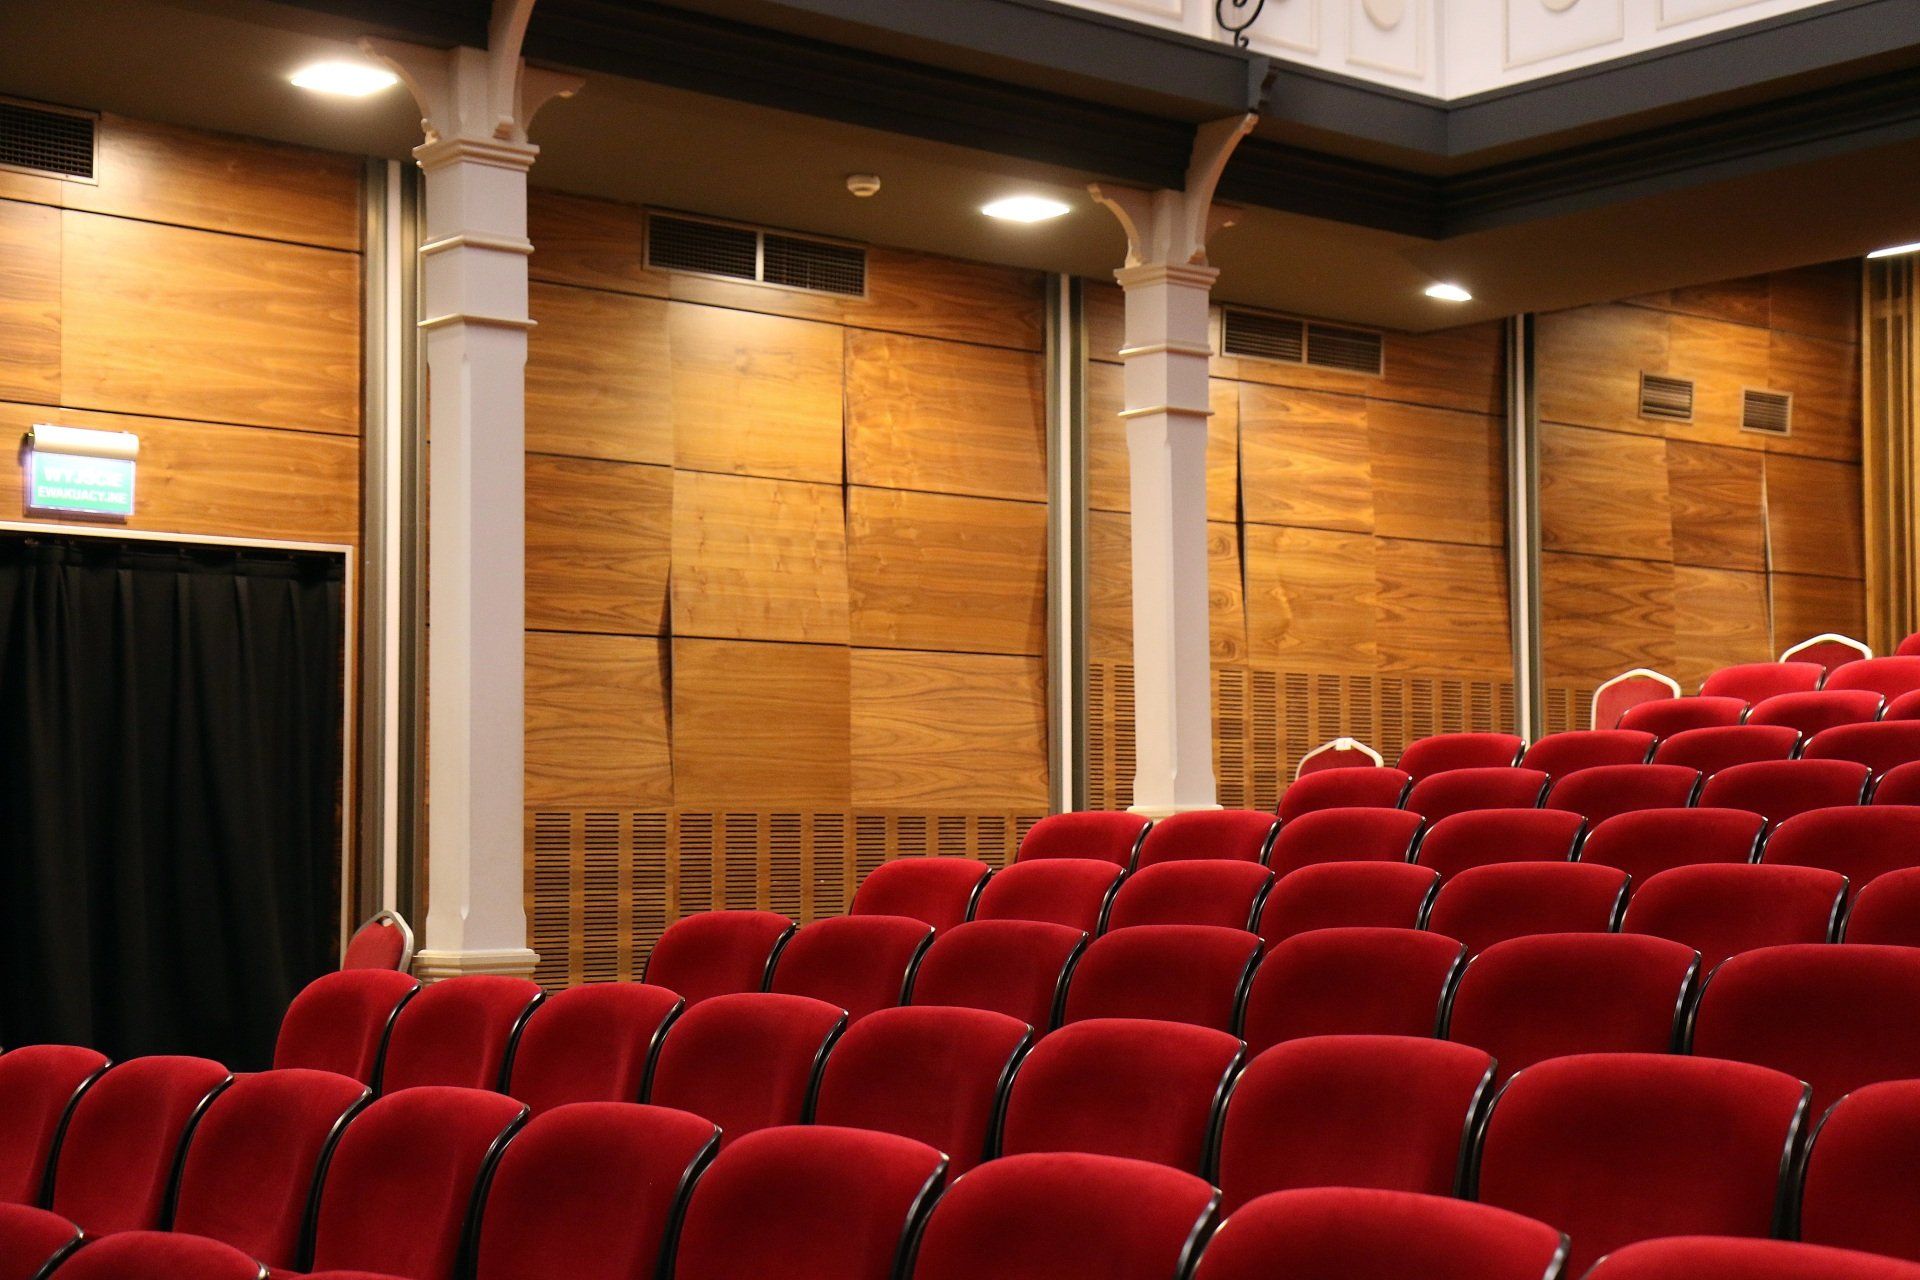 Red seating in a performing arts theater